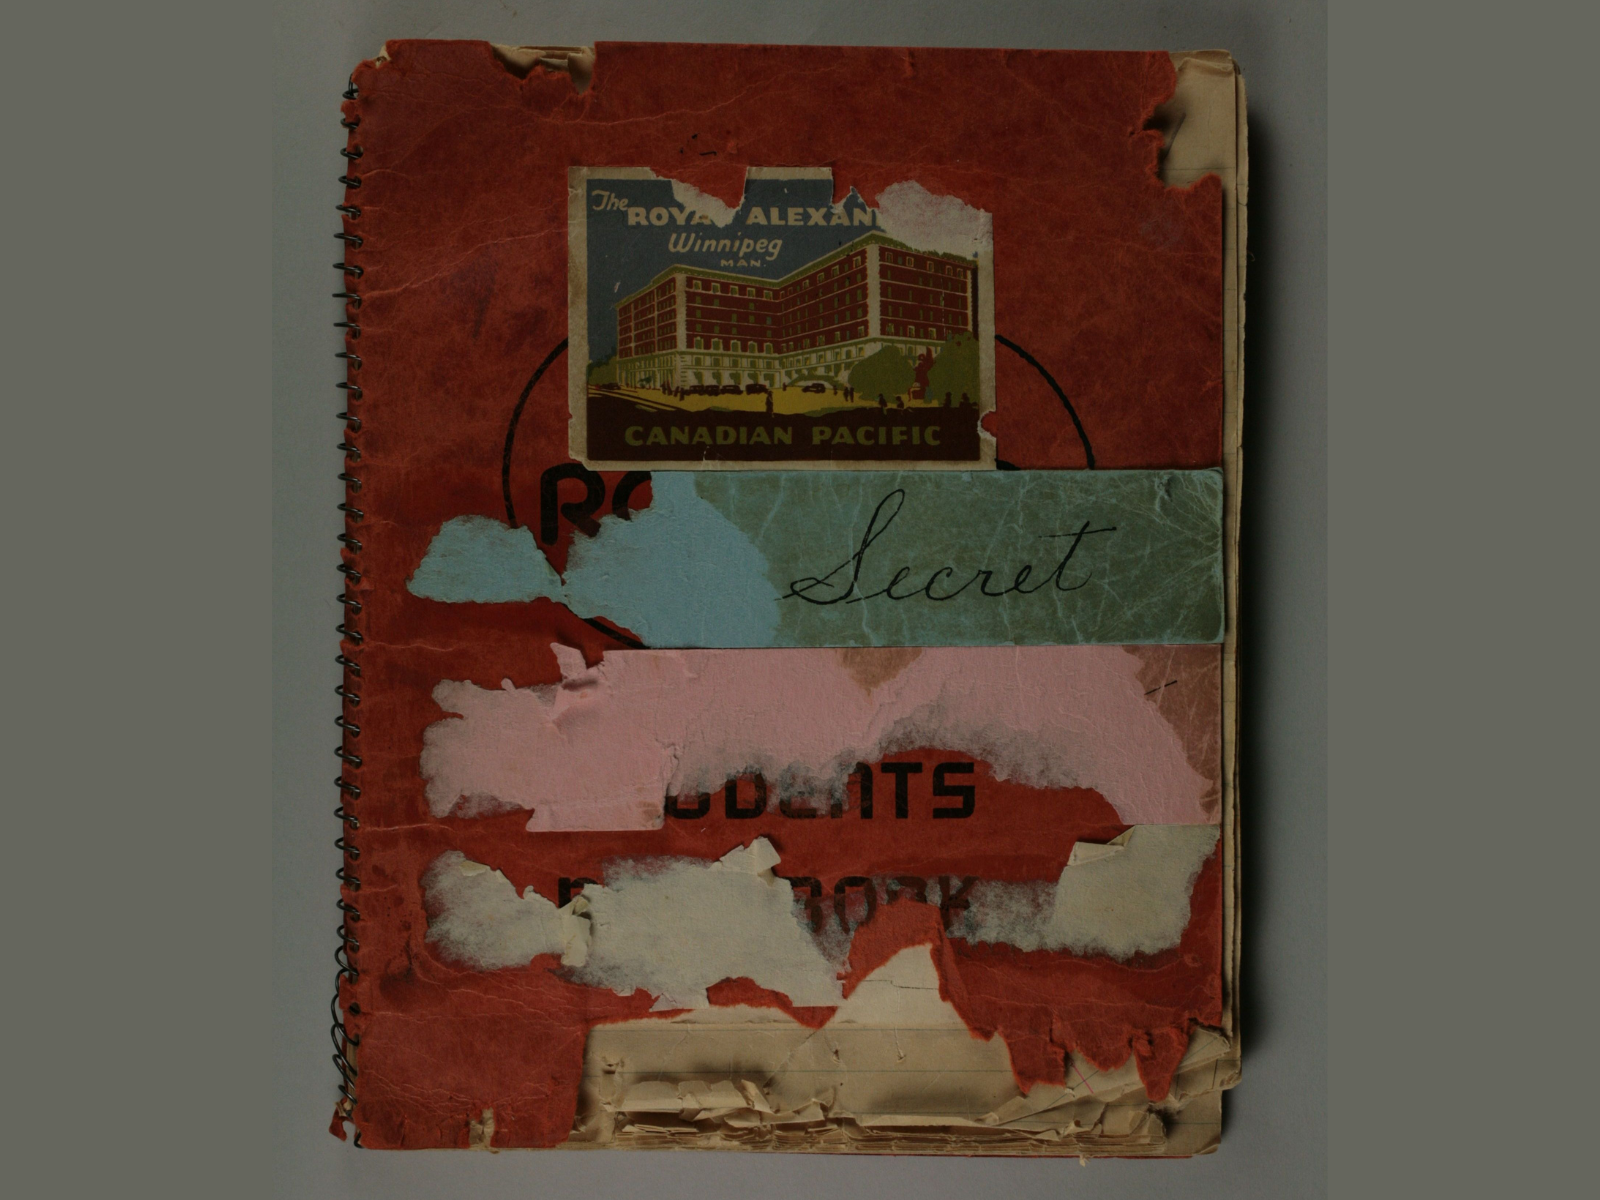 A worn sketchbook, it’s red cover torn and with the remains of torn off tape or stickers. A reminding piece of blue tape reads, “Secret” below a slightly torn sticker showing an image of a large red and white multi-story building and text reading, “The Royal Alexander / Winnipeg Man. / Canadian Pacific”.